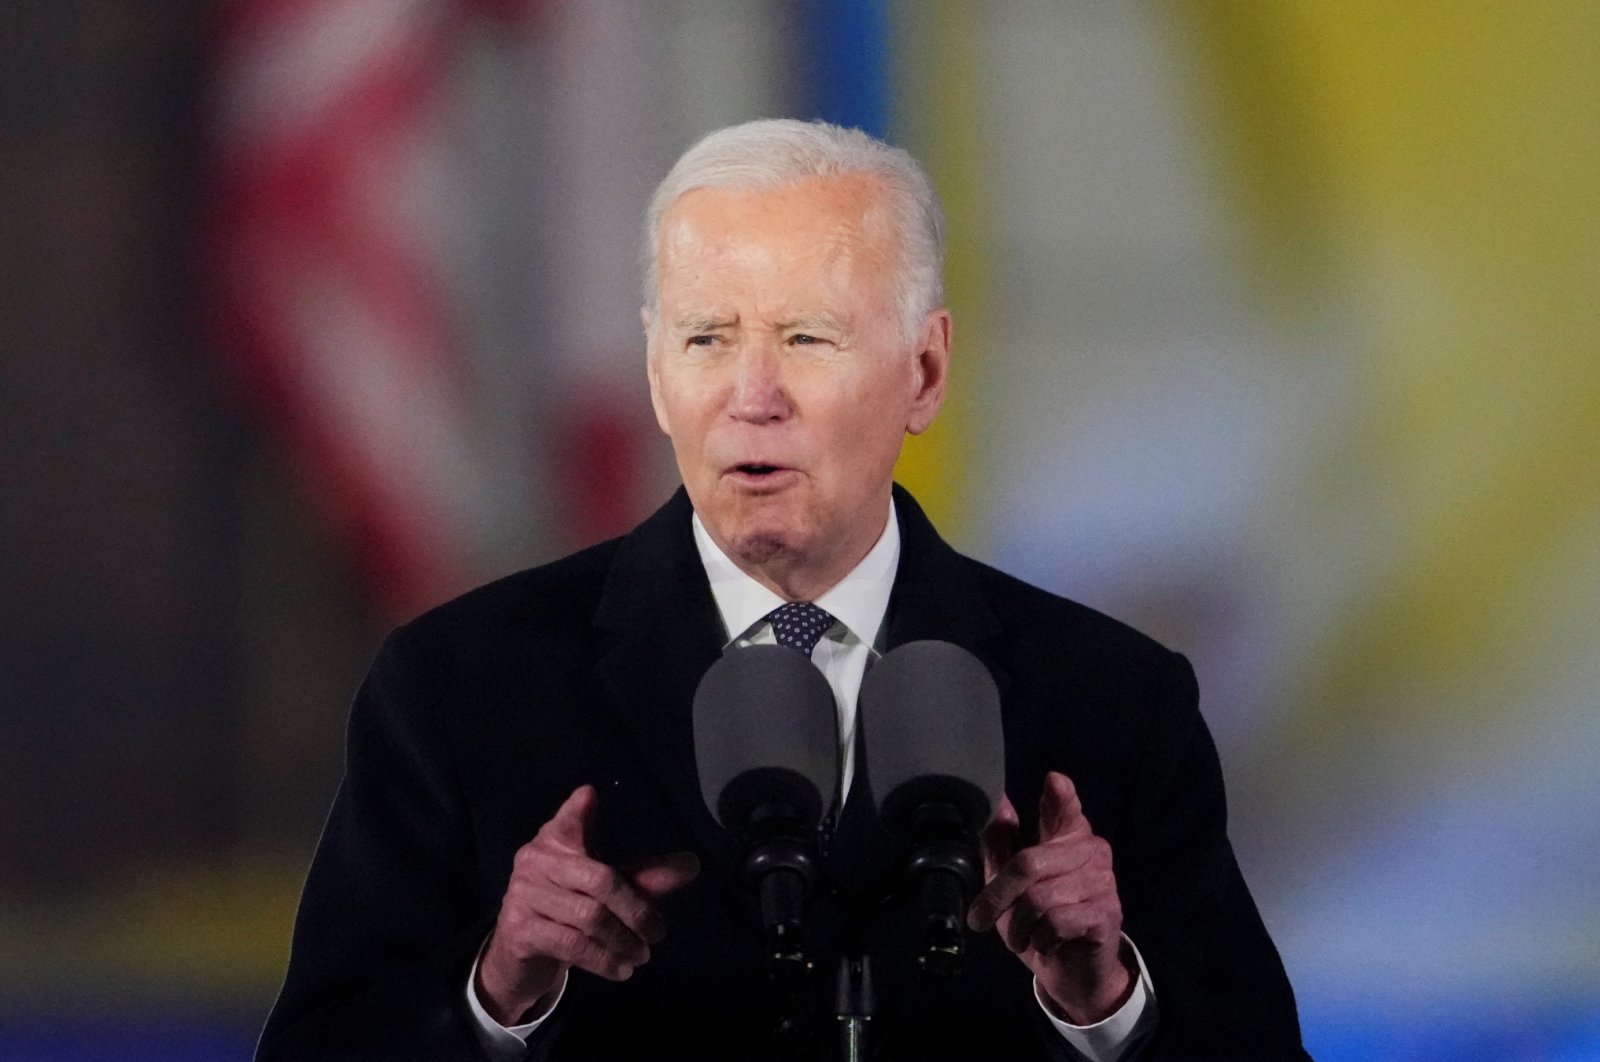 U.S. President Joe Biden delivers remarks ahead of the one-year anniversary of Russia’s invasion of Ukraine, during an event outside the Royal Castle, in Warsaw, Poland, Feb. 21, 2023. (Reuters Photo)